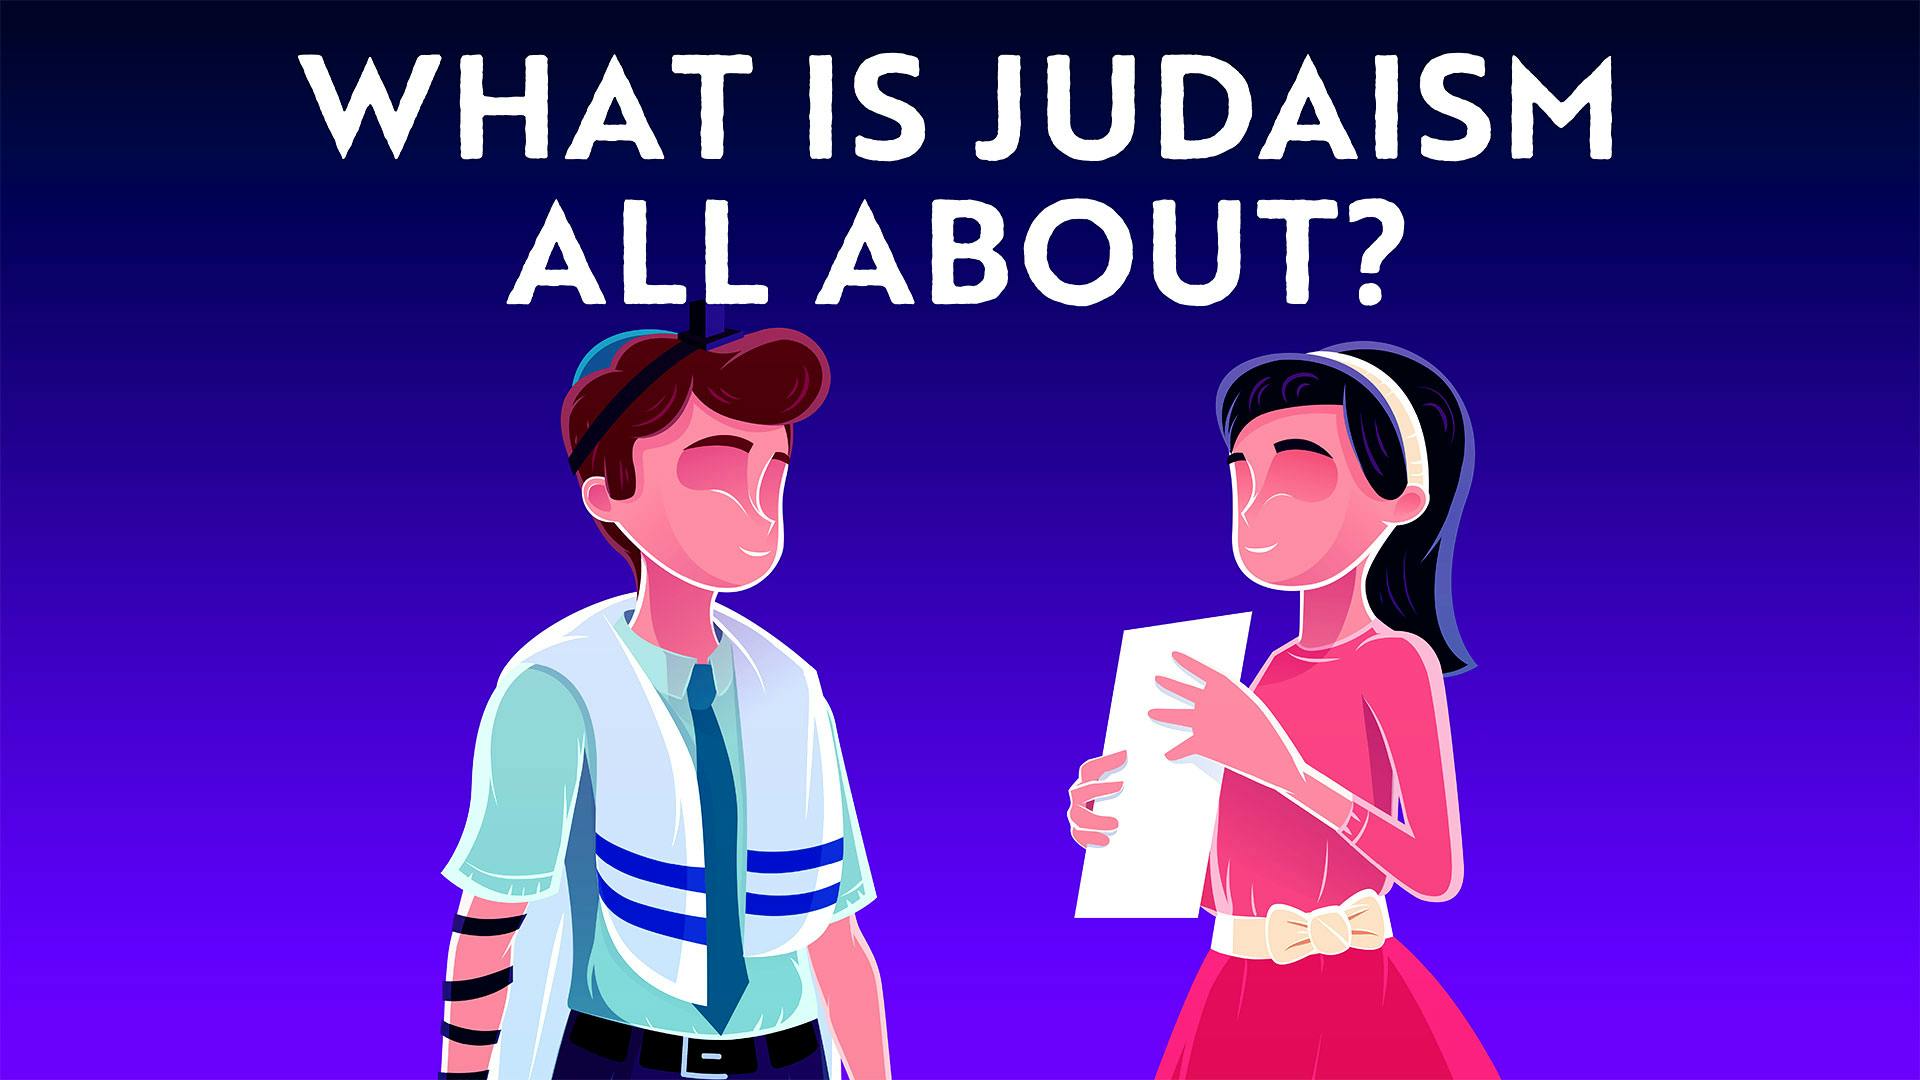 What is Judaism All About?